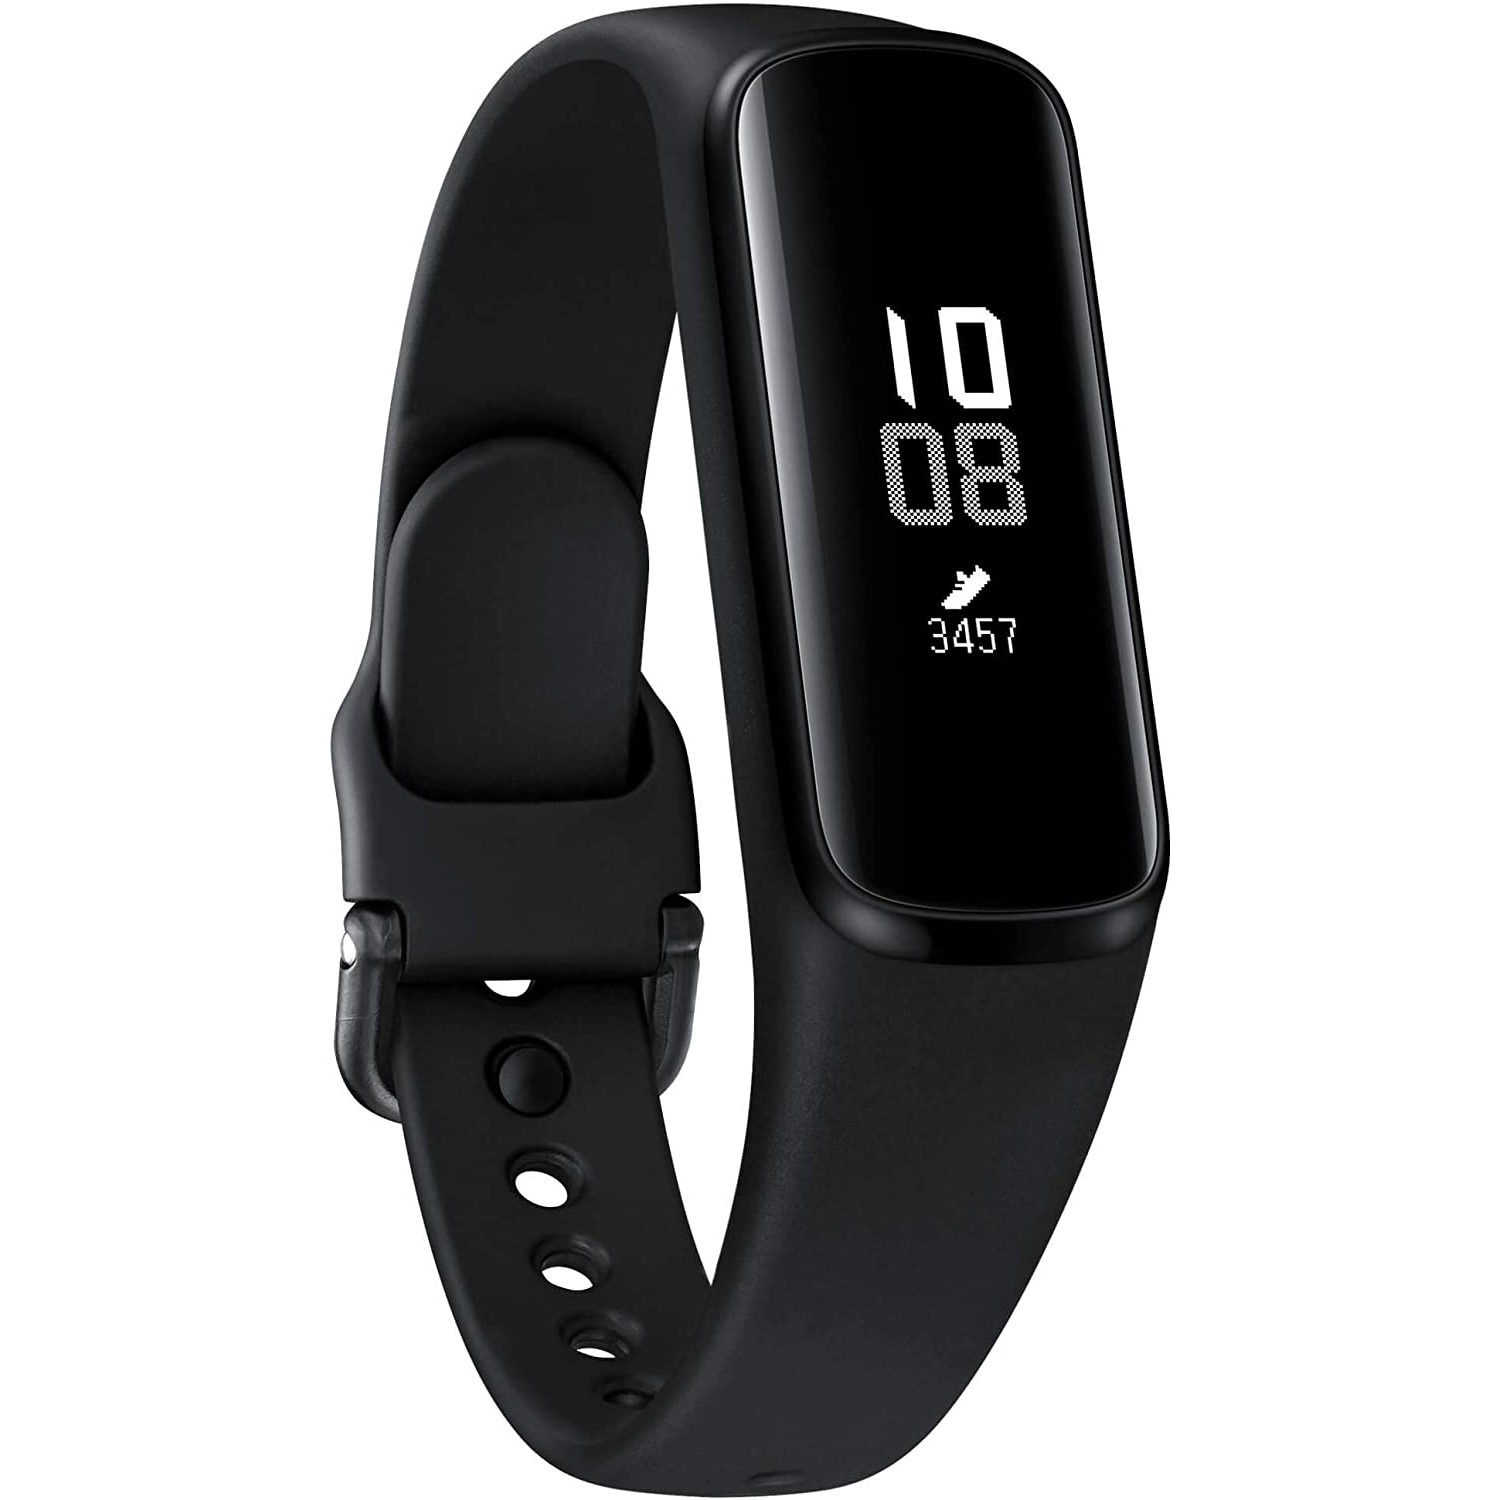 Refurbished (Excellent) - Samsung Galaxy Fit E Fitness Band - Heart Rate & Sleep Tracker - Black - Certified Refurbished